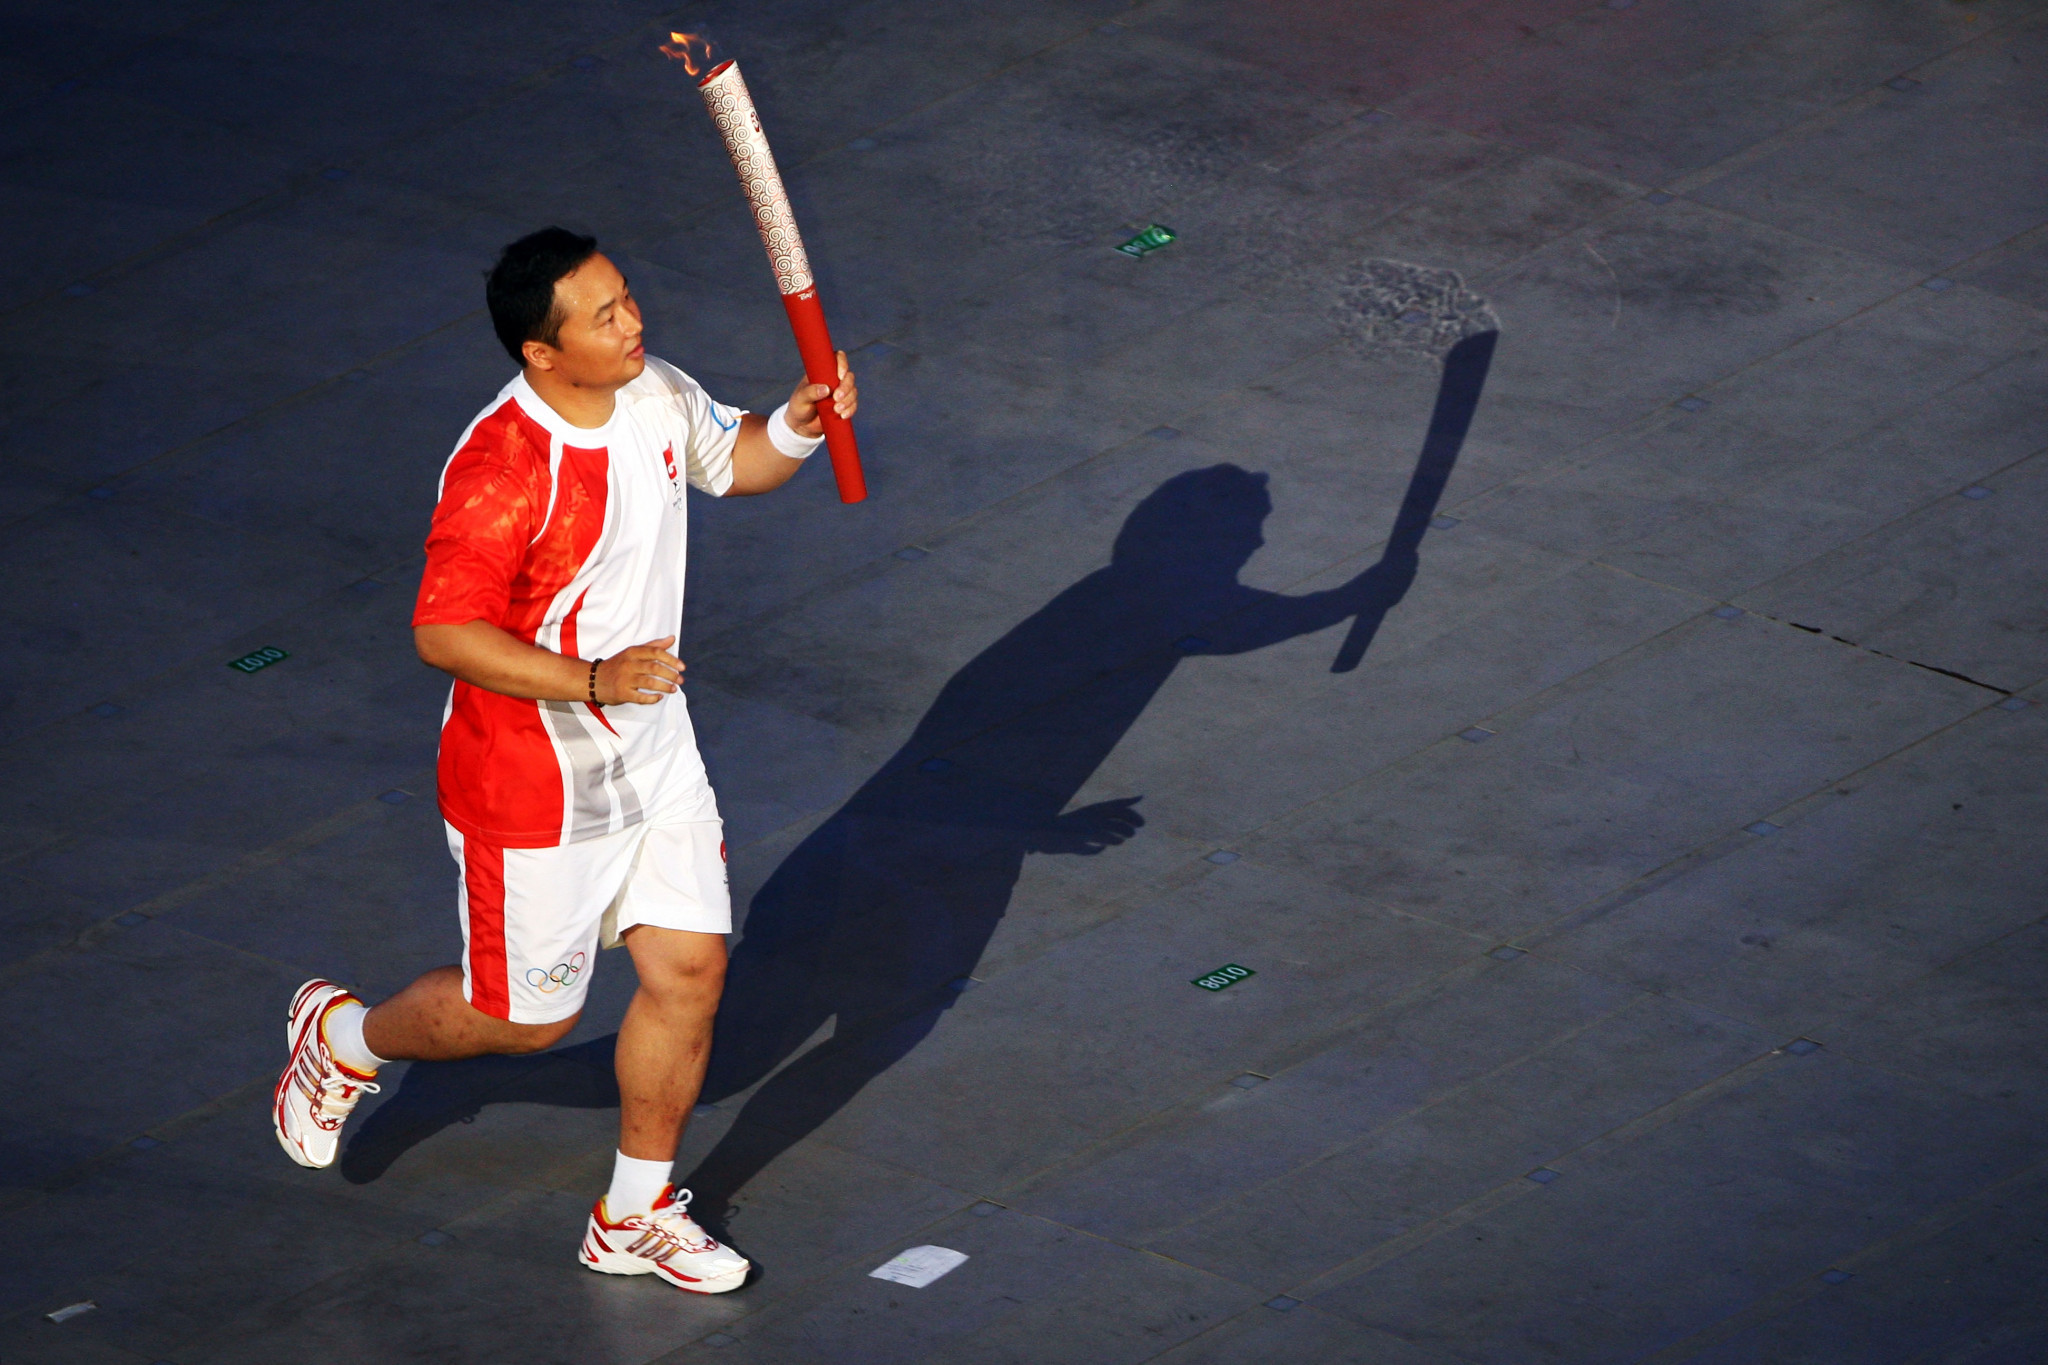 Zhang Jun has been appointed as the new chairman of the Chinese Badminton Association ©Getty Images